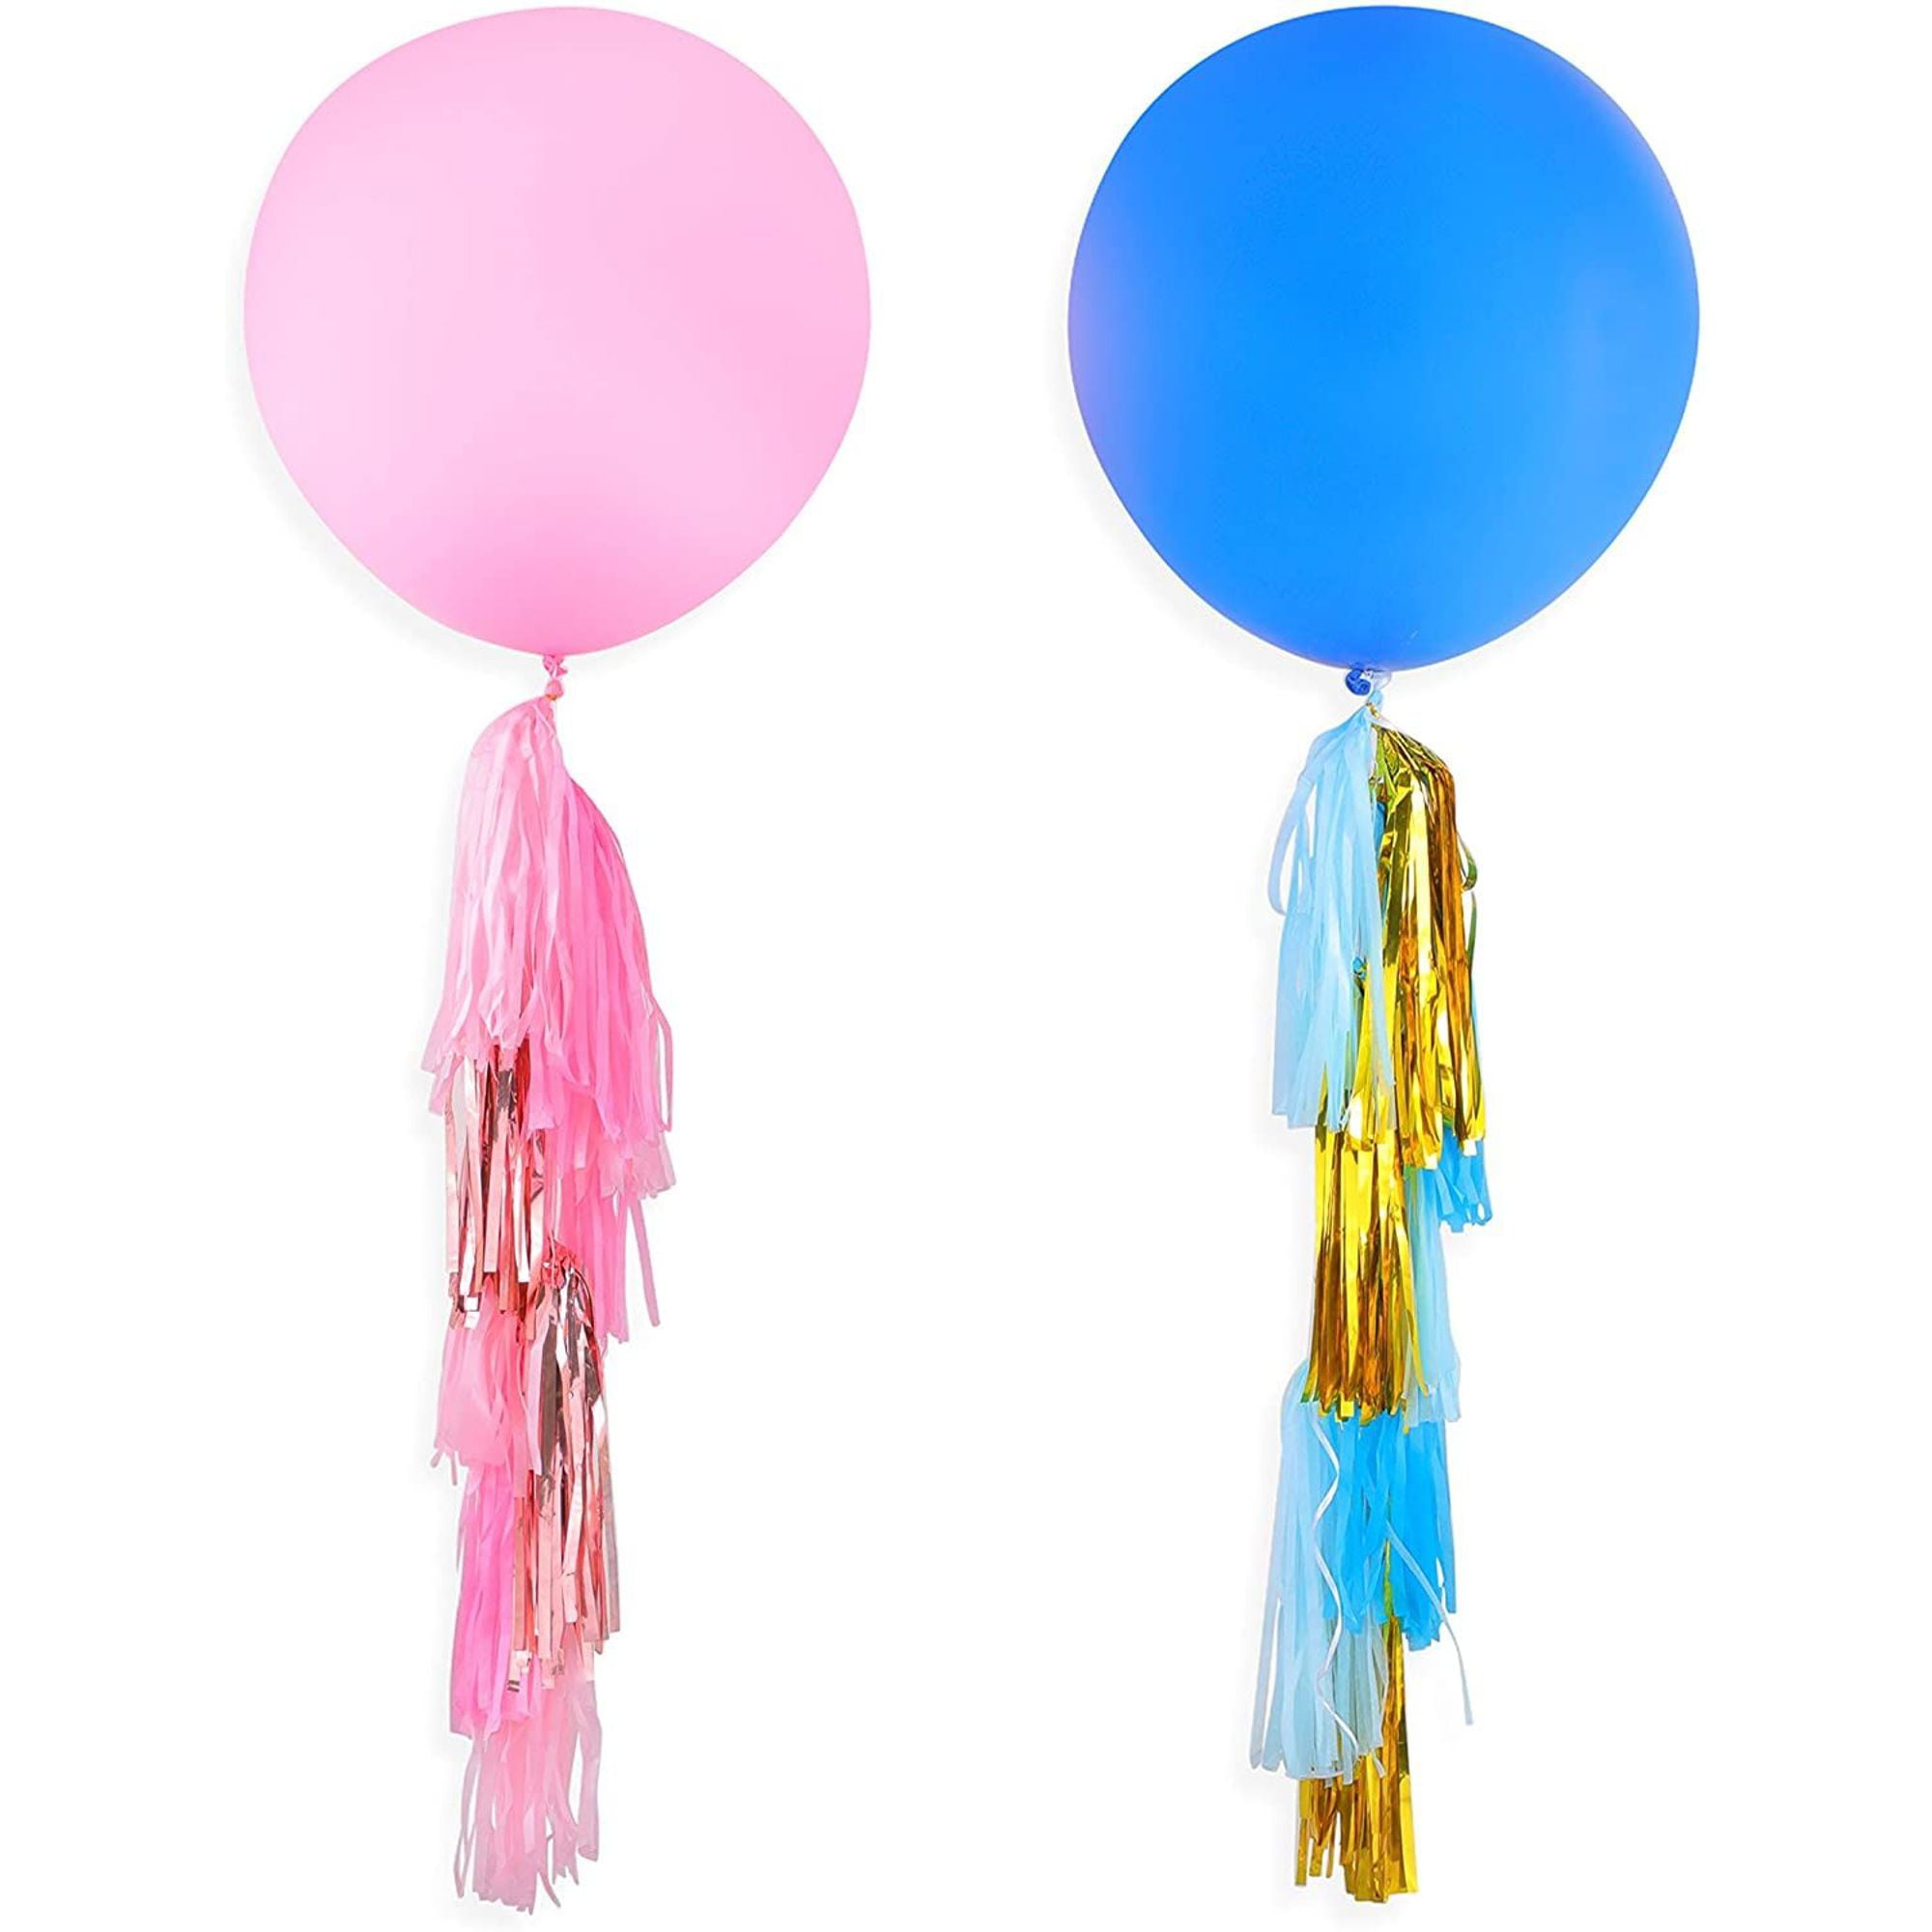 Christmas Gender Reveal Balloon Jumbo 36 Gold Gender Reveal Balloon Giant balloon with red and green tassels plus pink and blue confetti